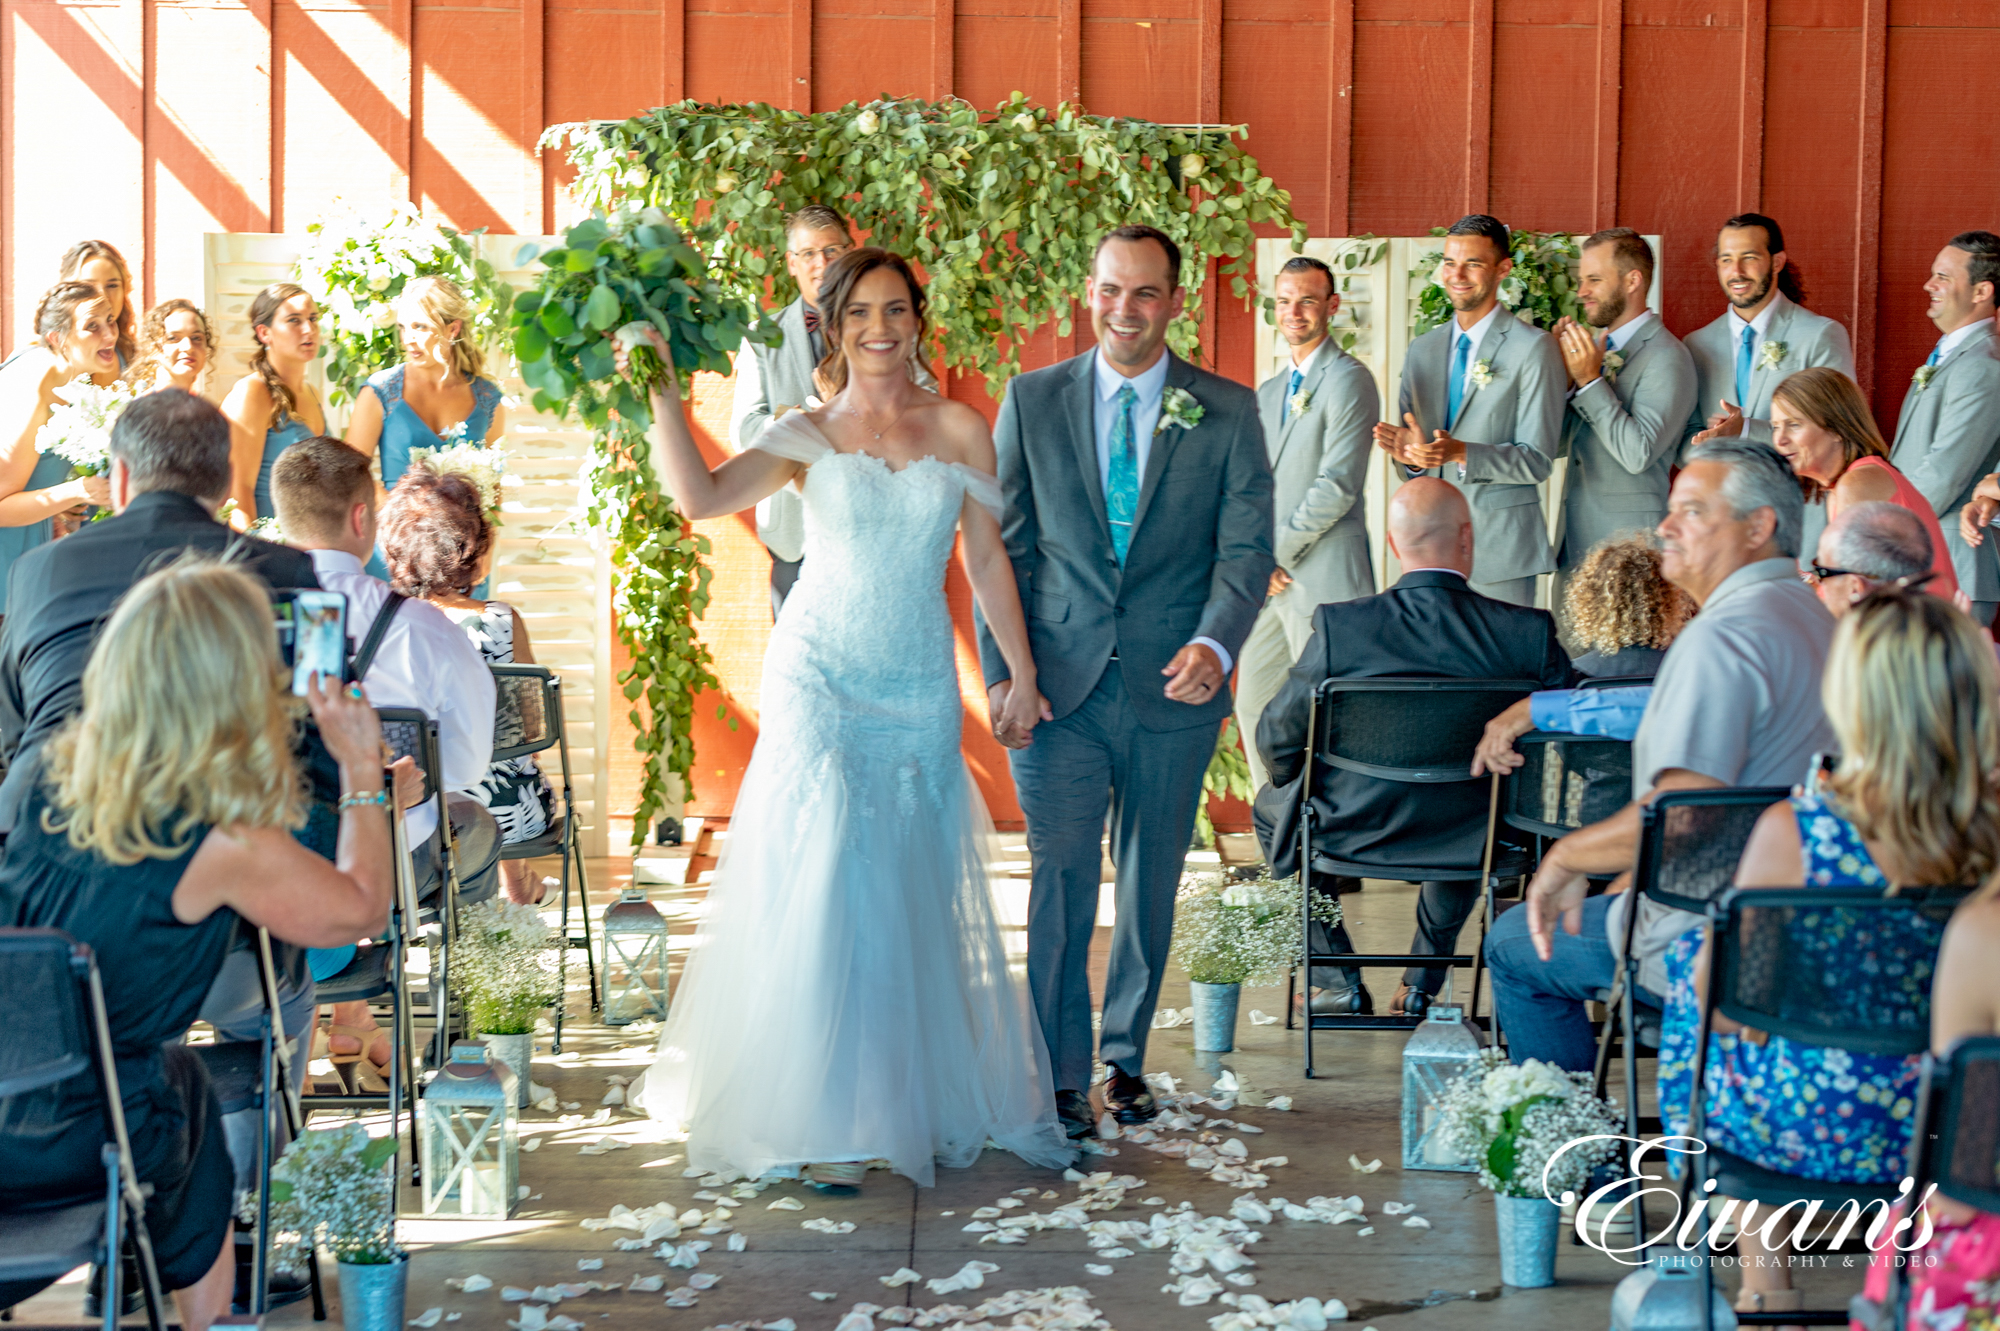 How to Have a Country Chic Wedding